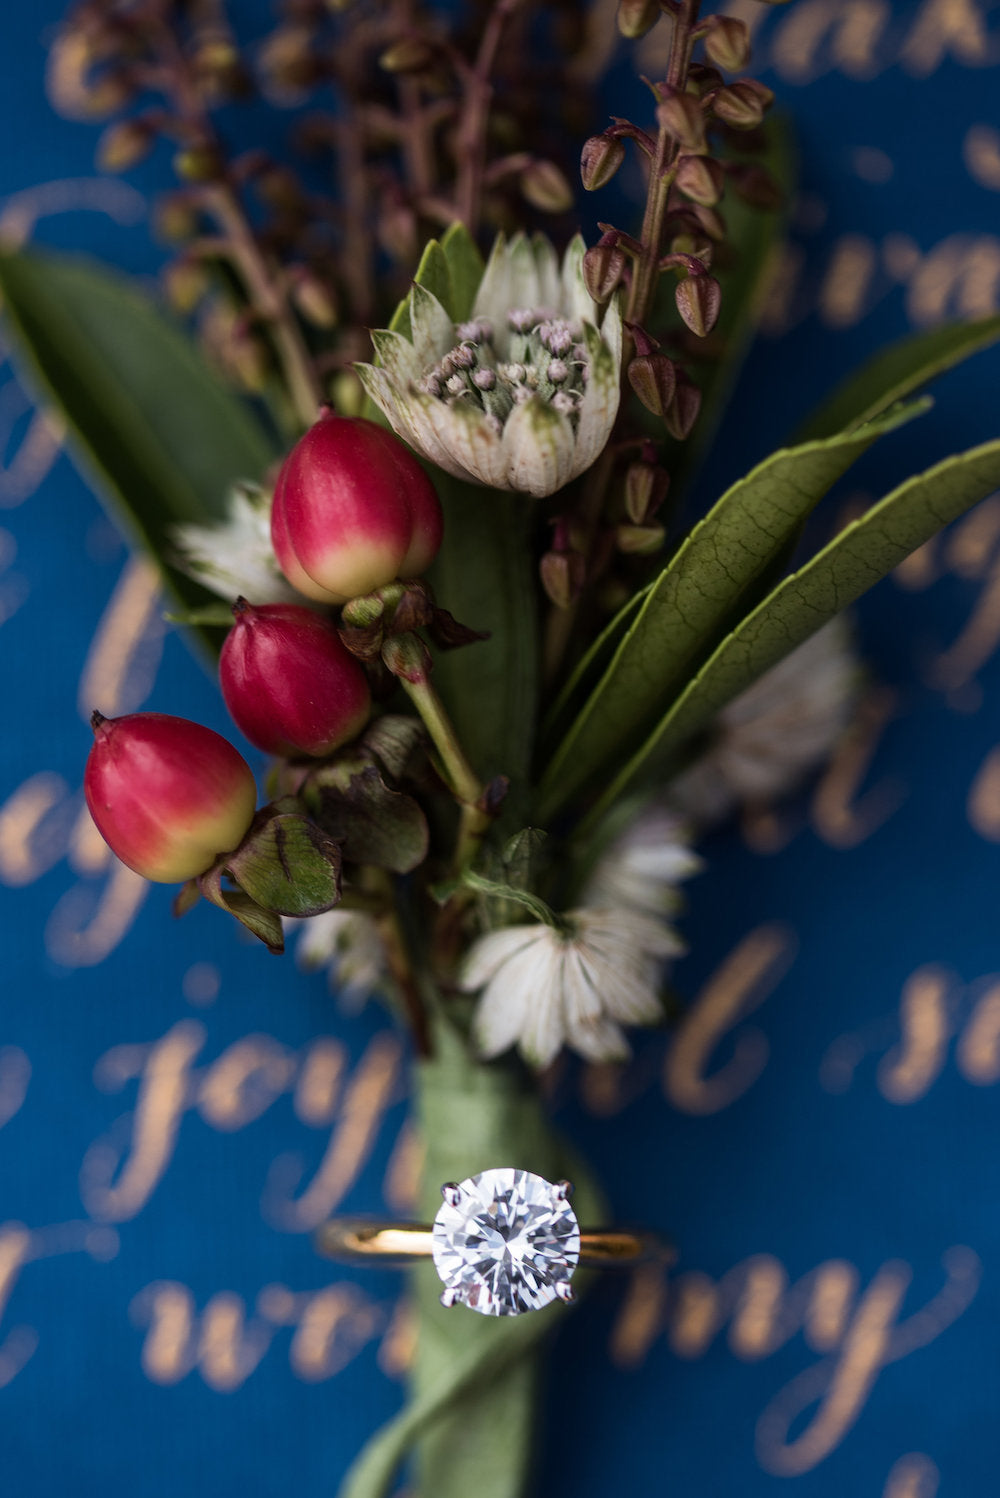 engagement ring - tips for changing or postponing wedding date from The Garter Girl